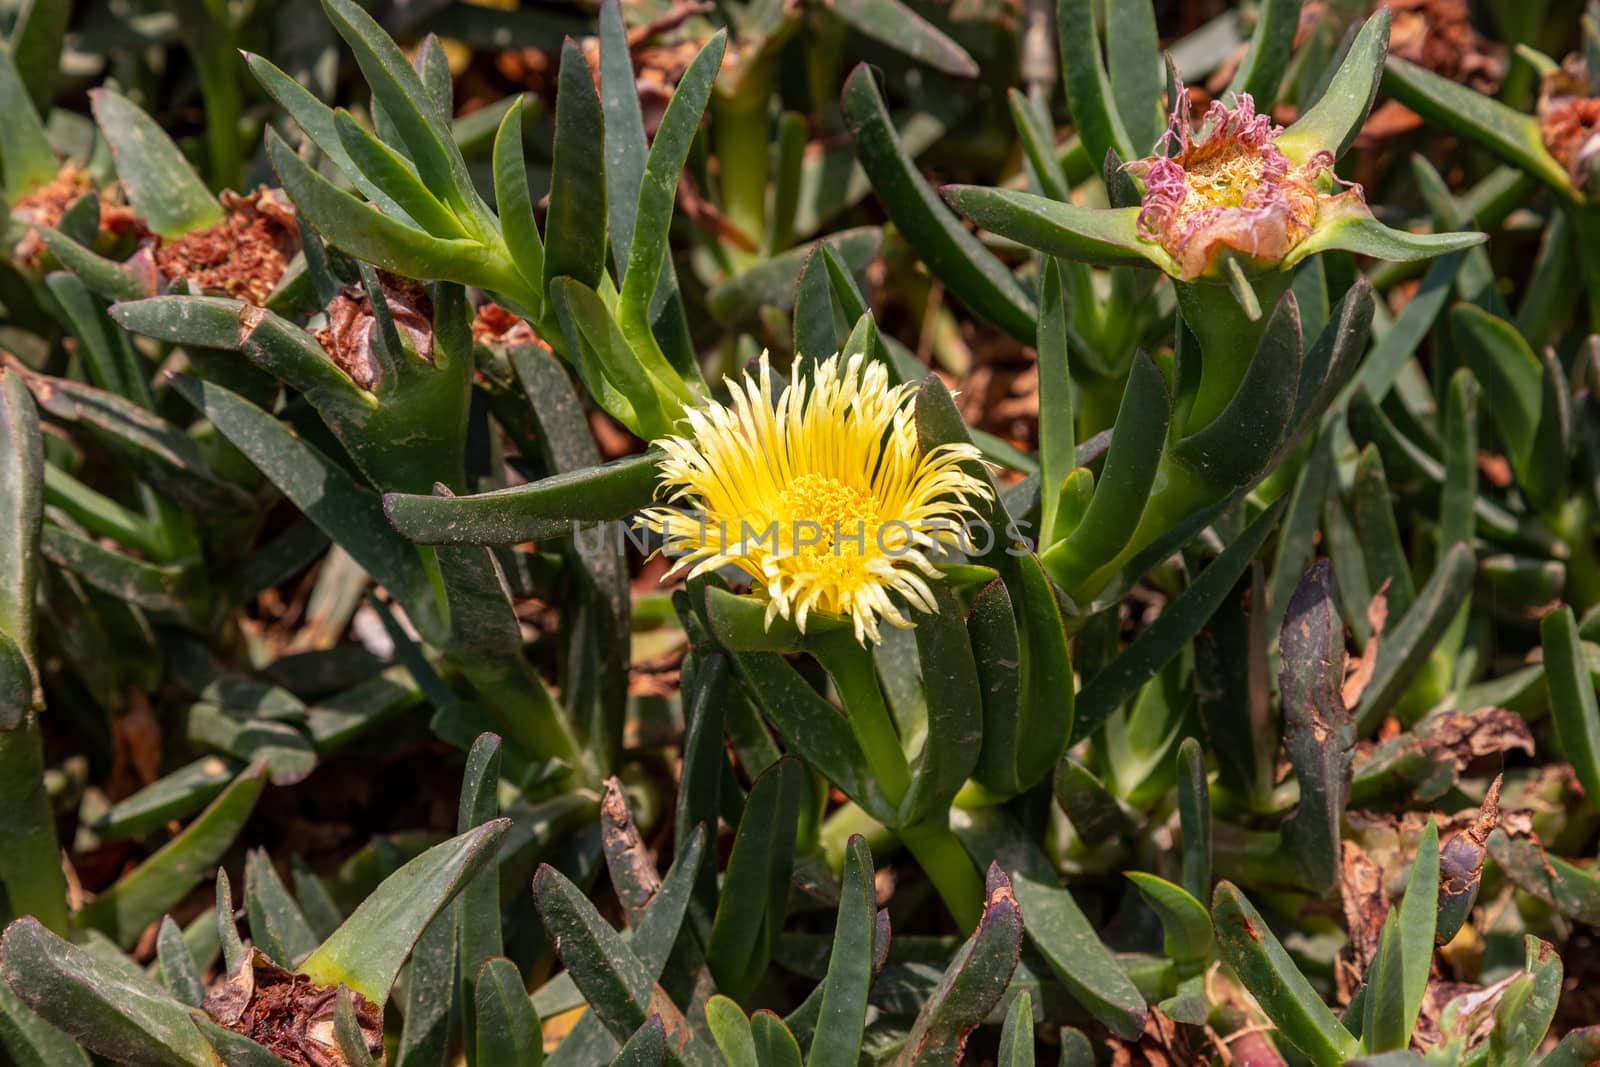 Vegetation on Rhodes island, Greece. Close up of a succulent plant with yellow blossom